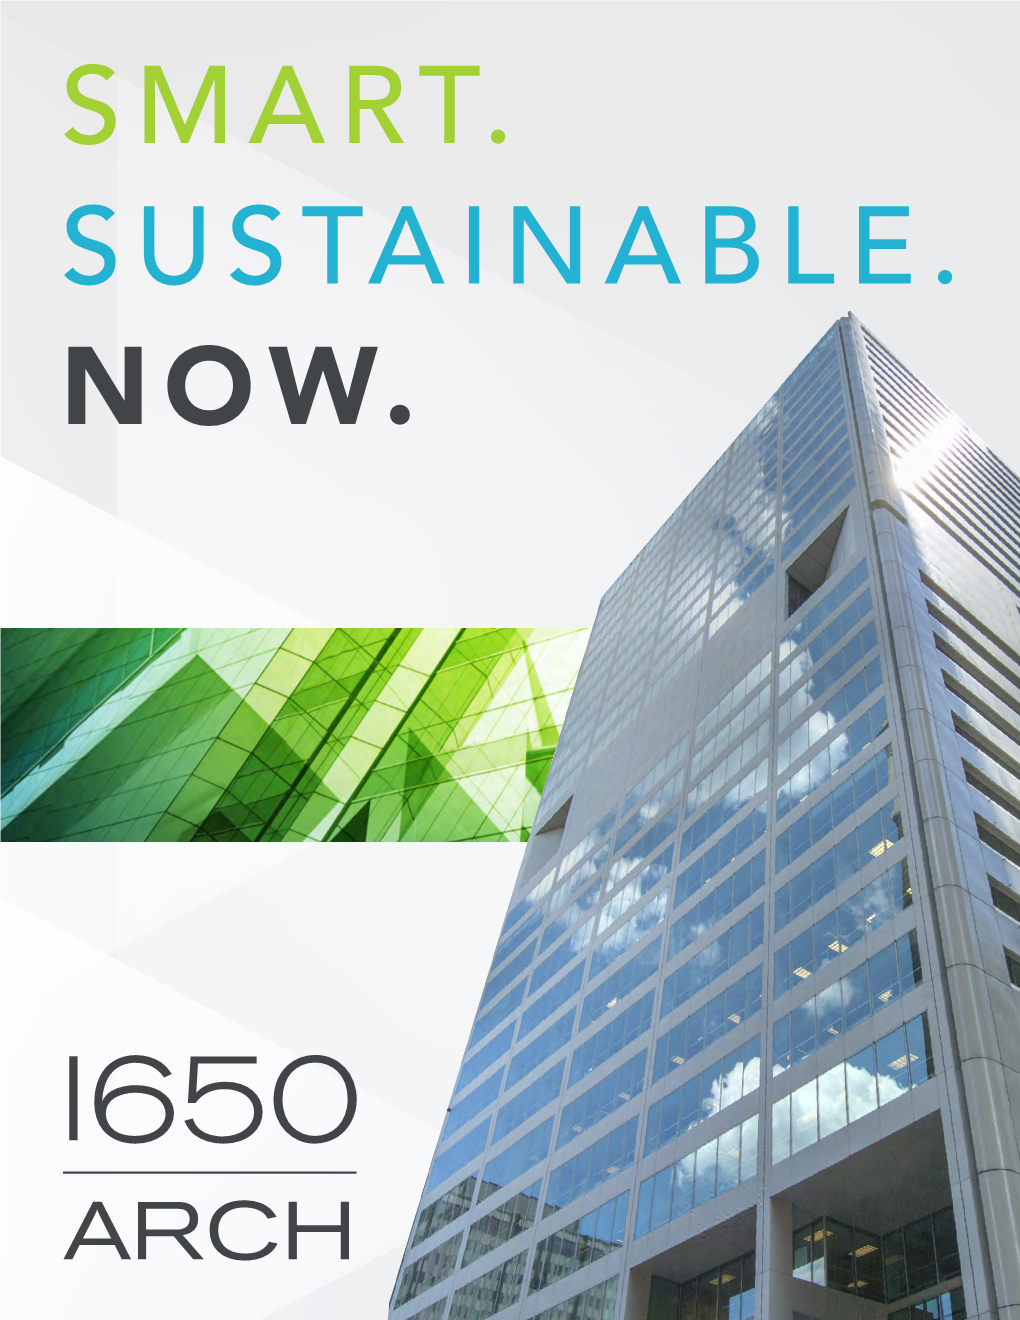 Smart. Sustainable. Now